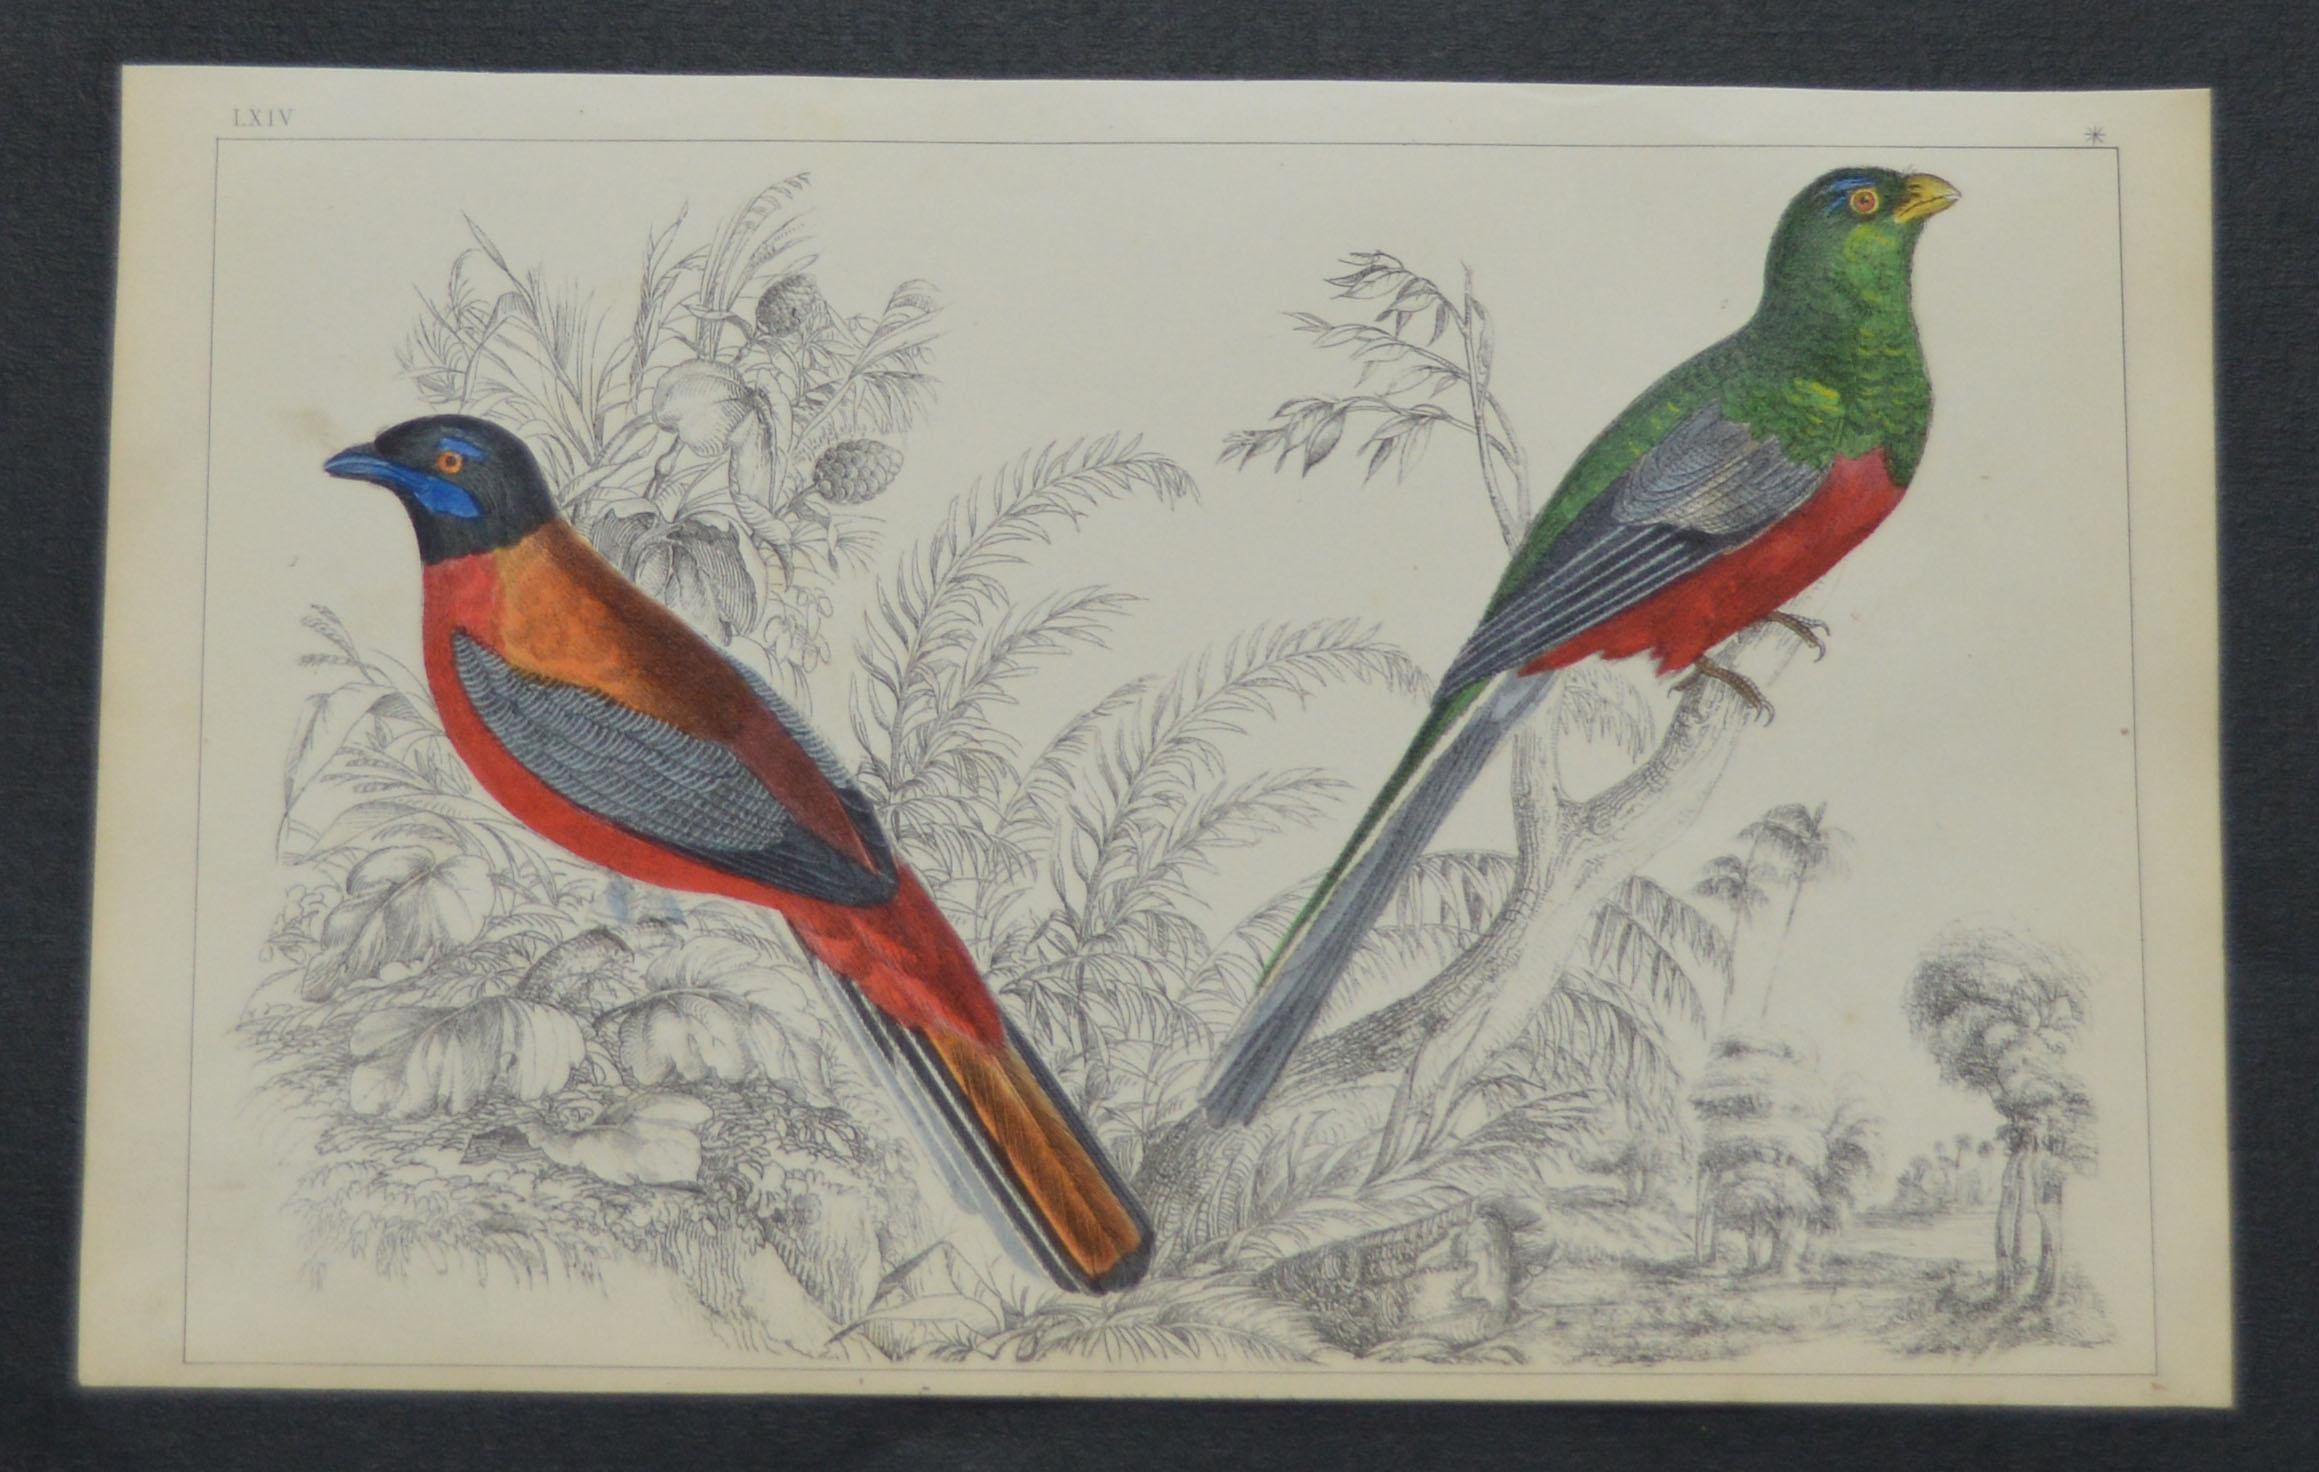 Great image of parrots.

I have listed several loose natural history prints in the same series.

Unframed. It gives you the option of perhaps making a set up using your own choice of frames.

Lithograph after Cpt. Brown with original hand